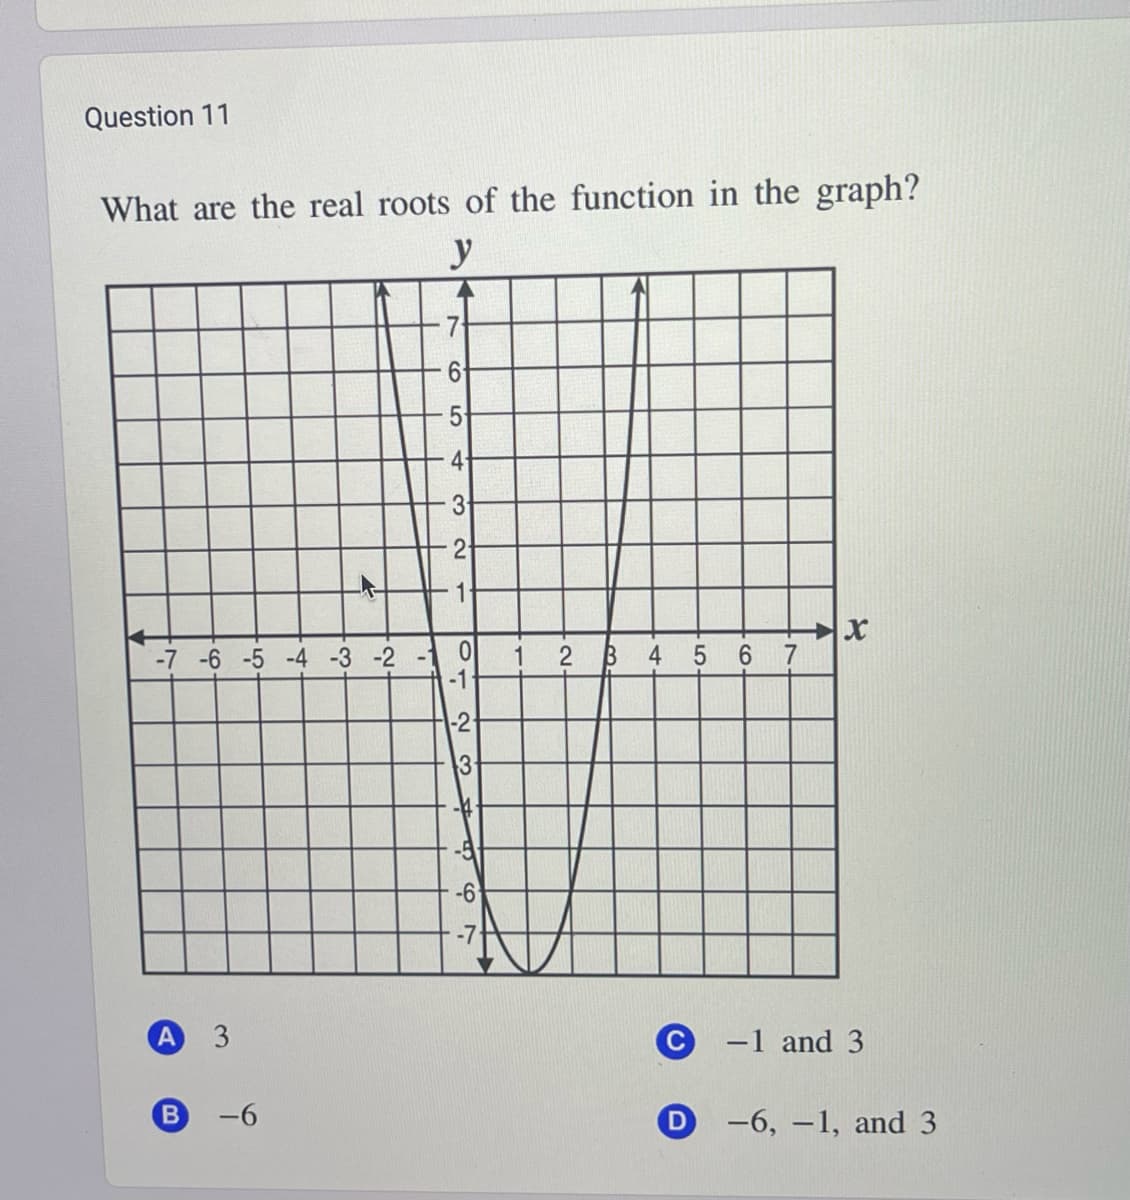 Question 11
What are the real roots of the function in the graph?
y
-7 -6 -5 -4 -3 -2
A 3
B
-
7
61
4
3
2₁
11
0
-1
-2
3₁
-6
1
2
B
4 5 6 7
C -1 and 3
D-6, -1, and 3